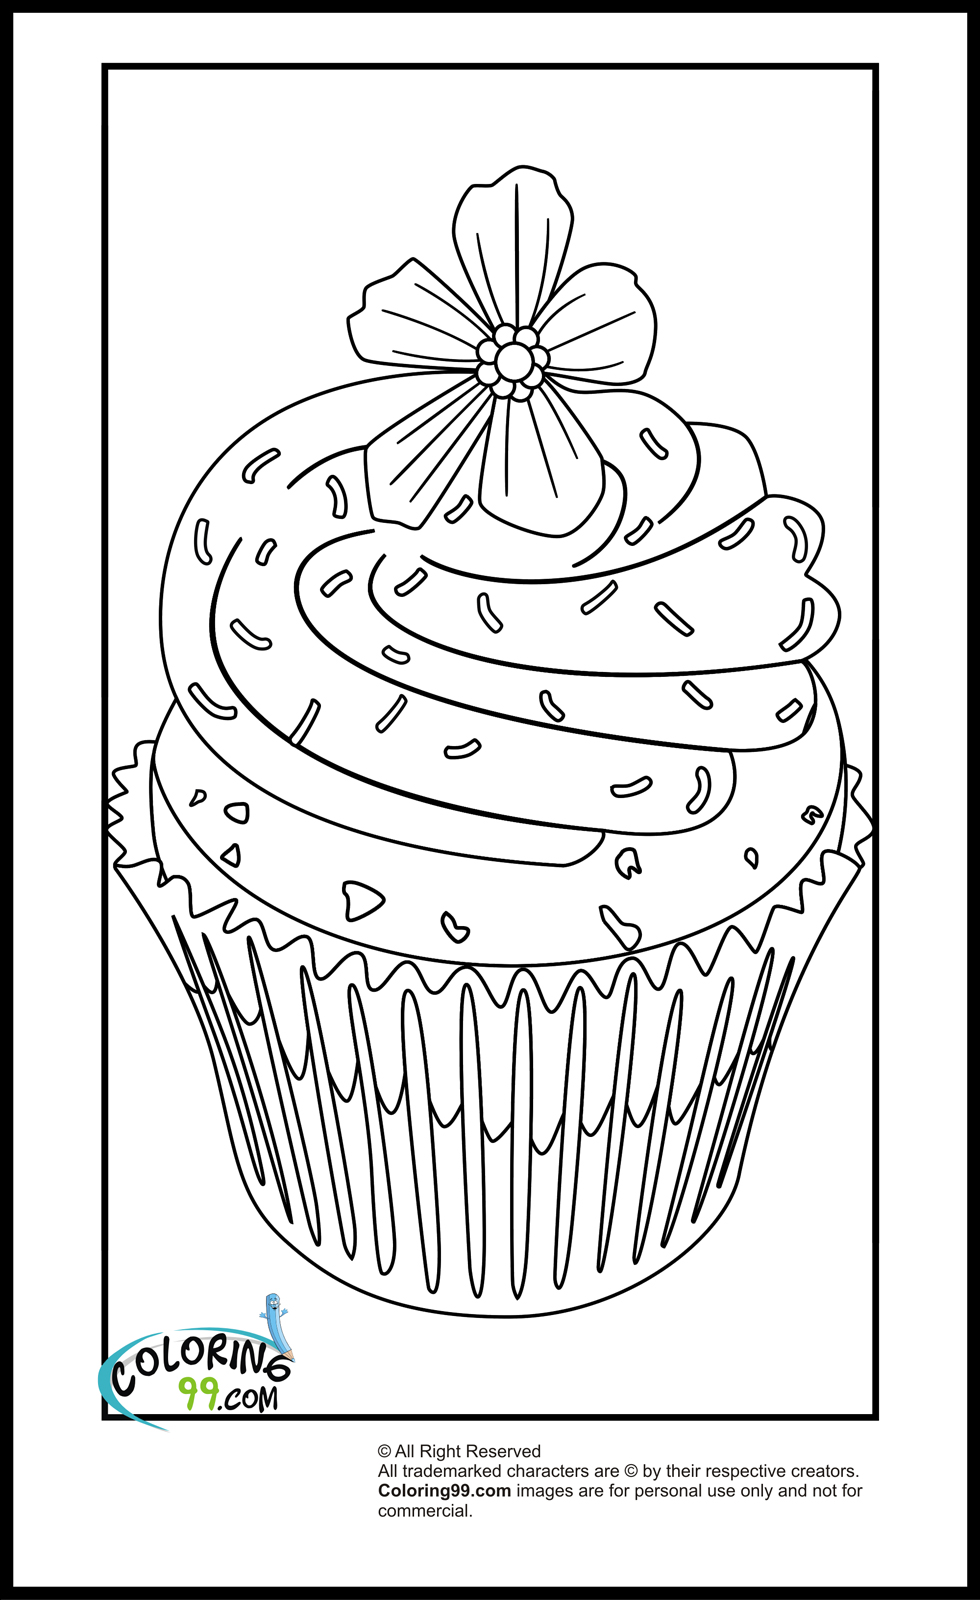 Cupcake Coloring Pages  Team colors